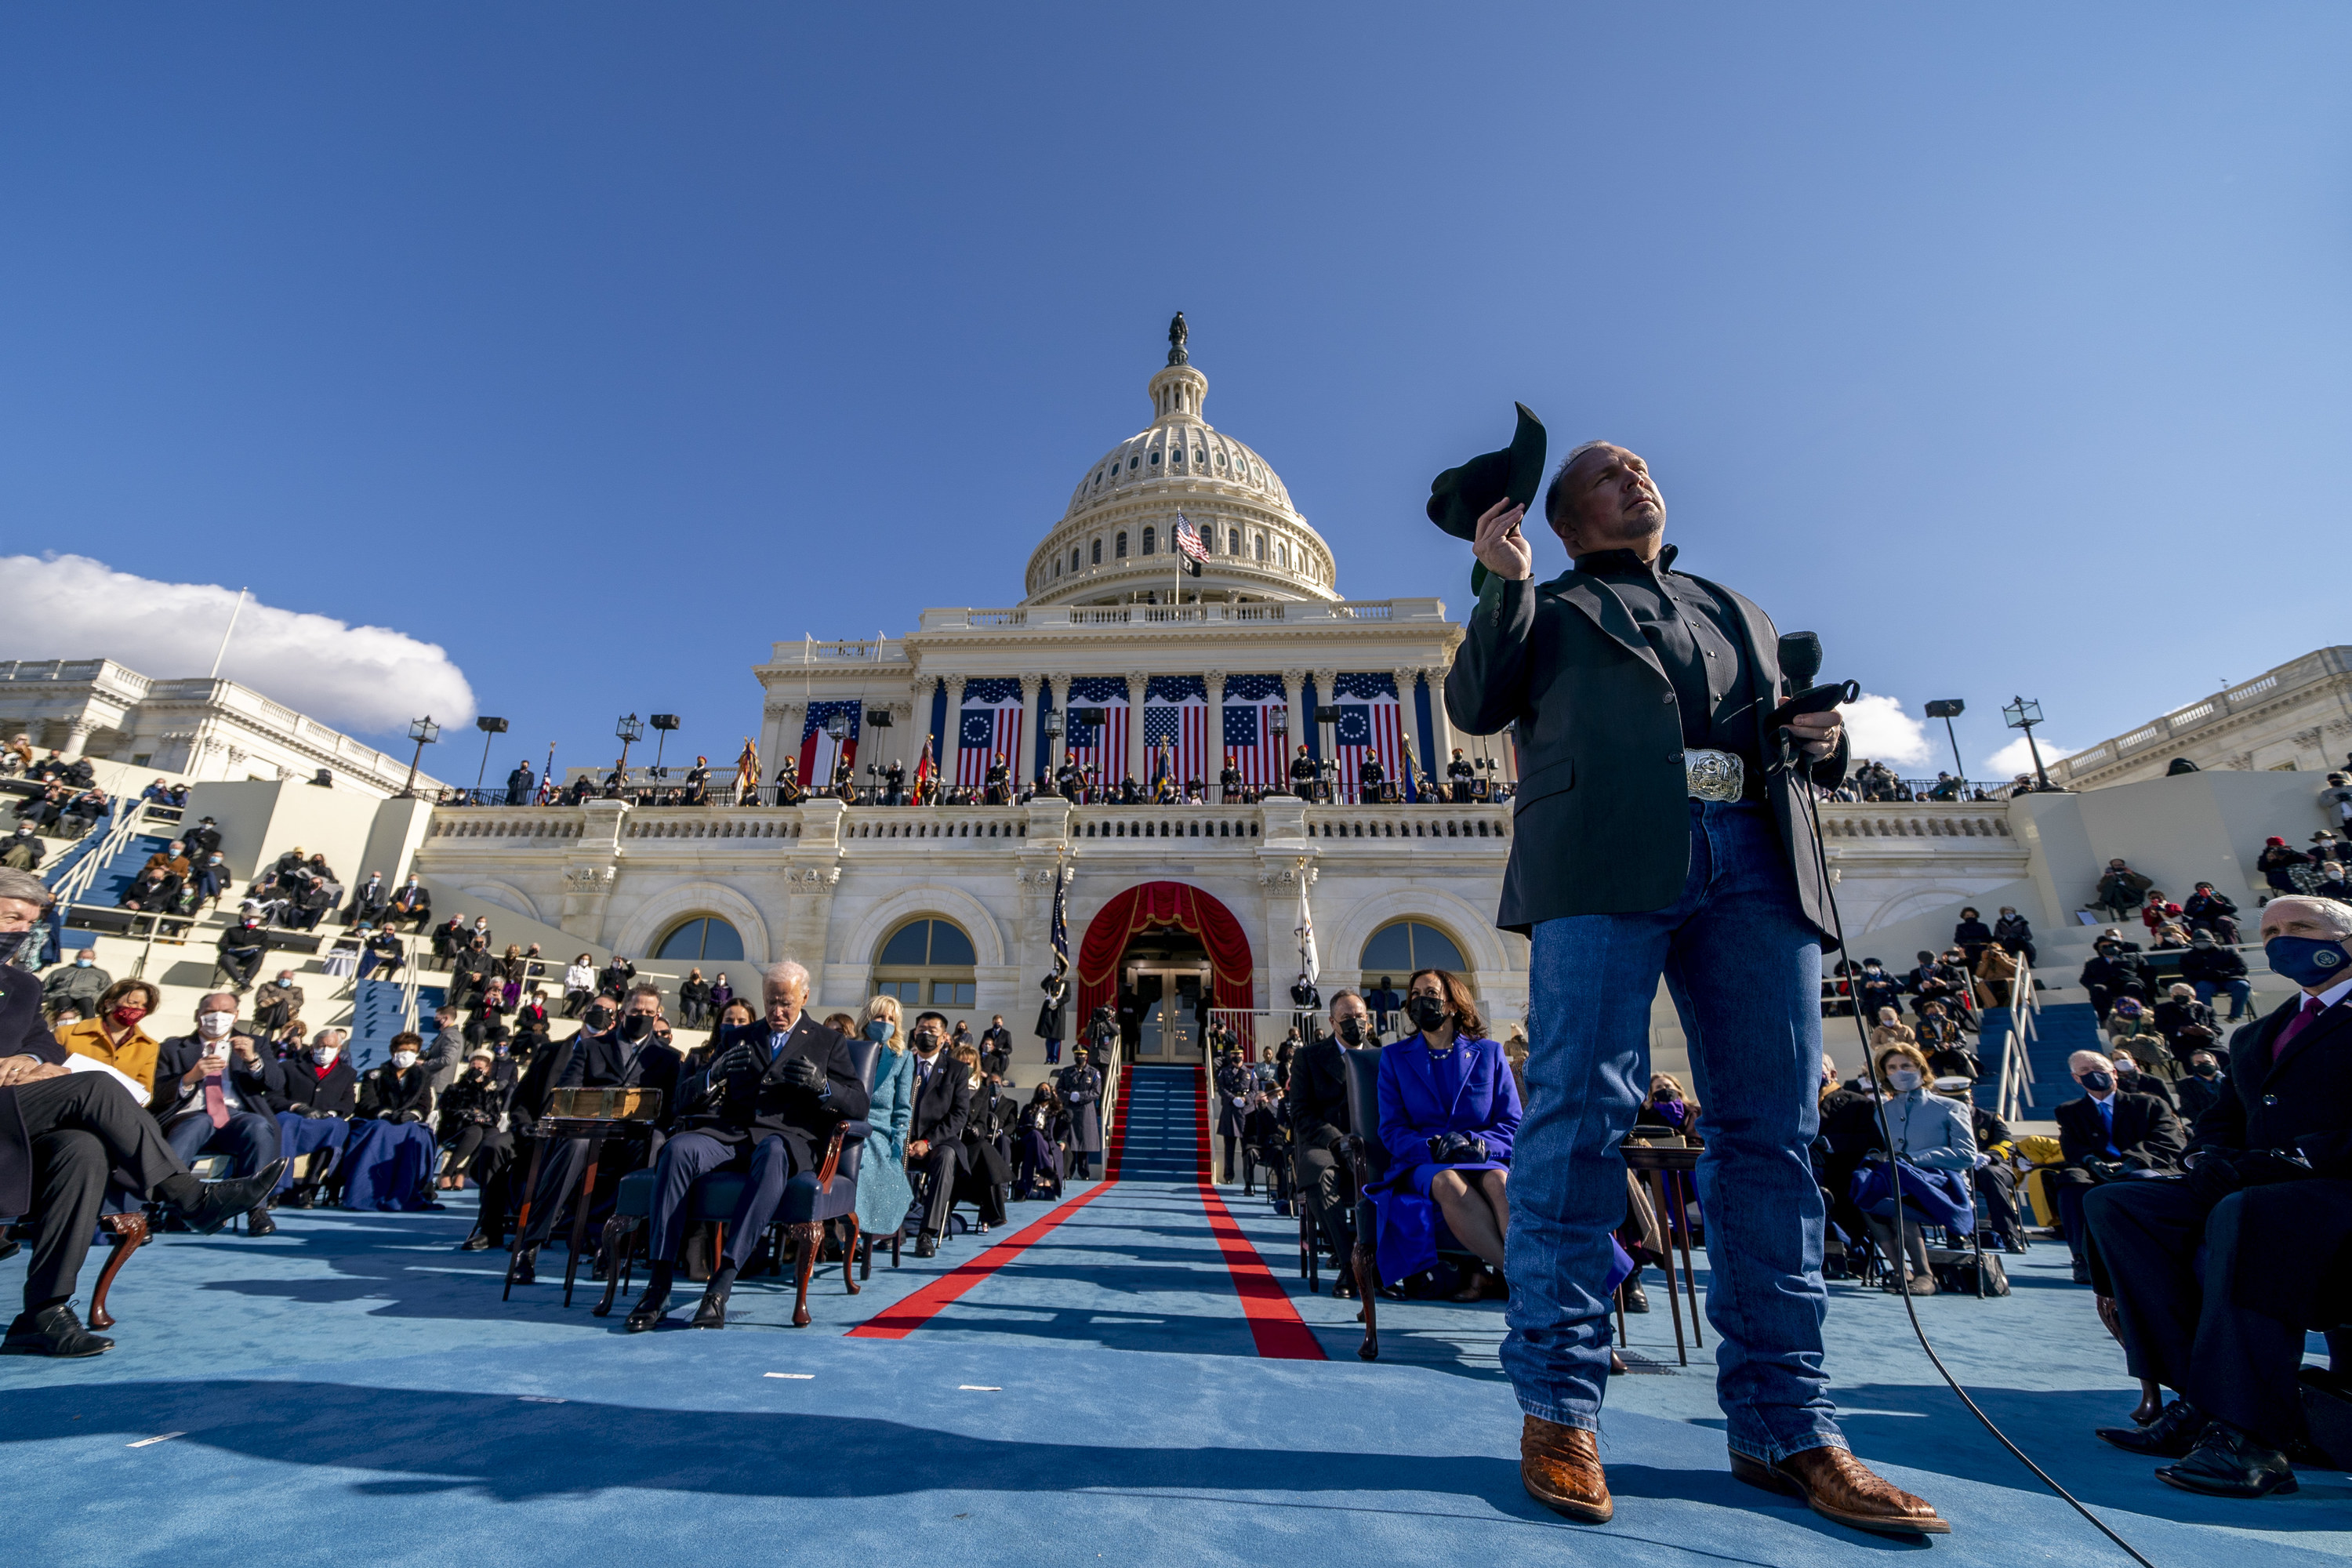 Garth Brooks performs at the inauguration for President Joe Biden and Vice President Kamala Harris on the West Front of the US Capitol